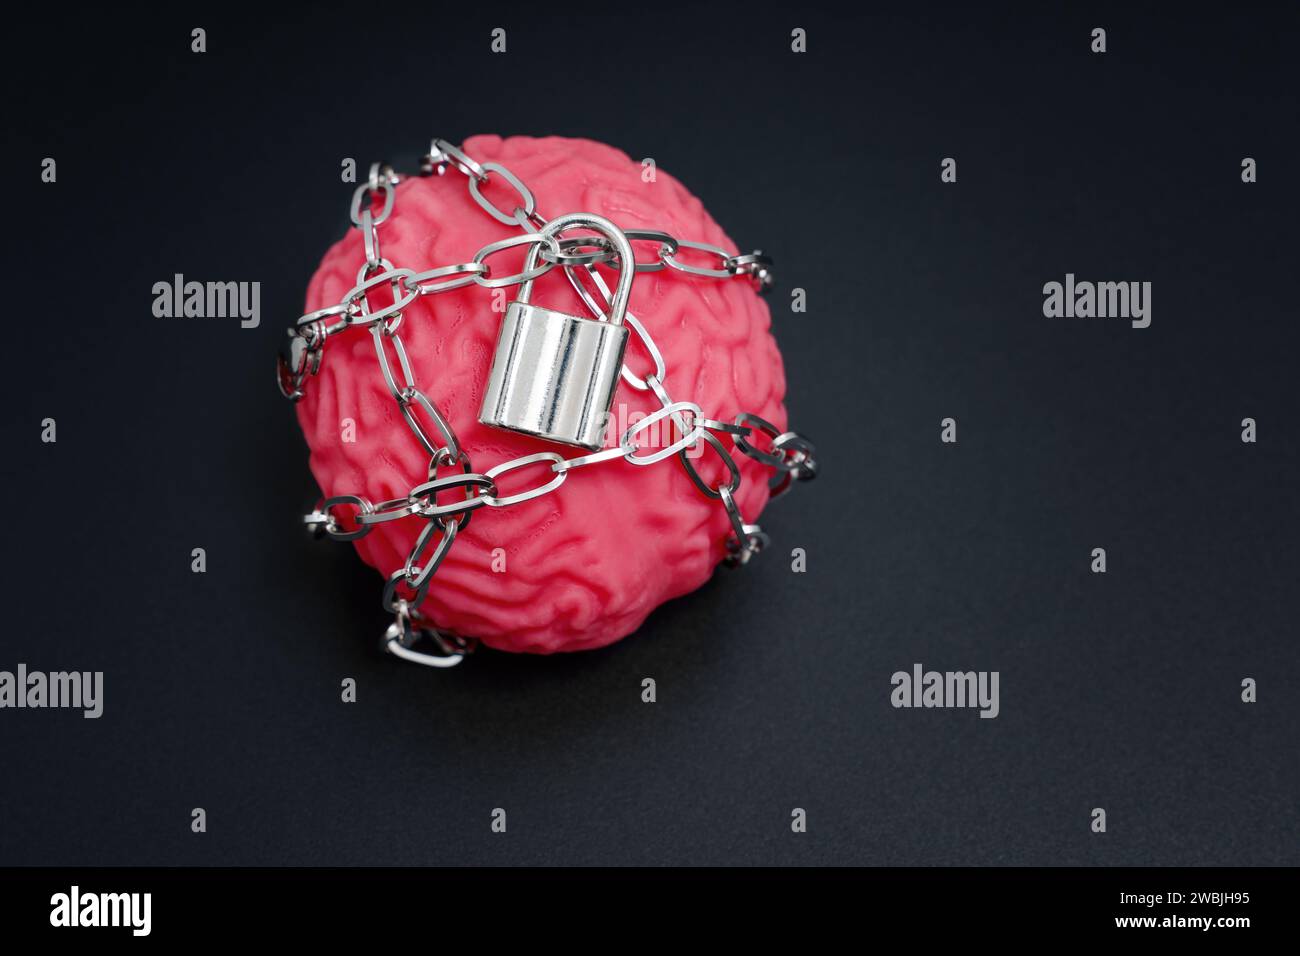 Close-up of a human brain model confined by chains and secured with a padlock isolated on black. Mental Imprisonment related concept. Stock Photo